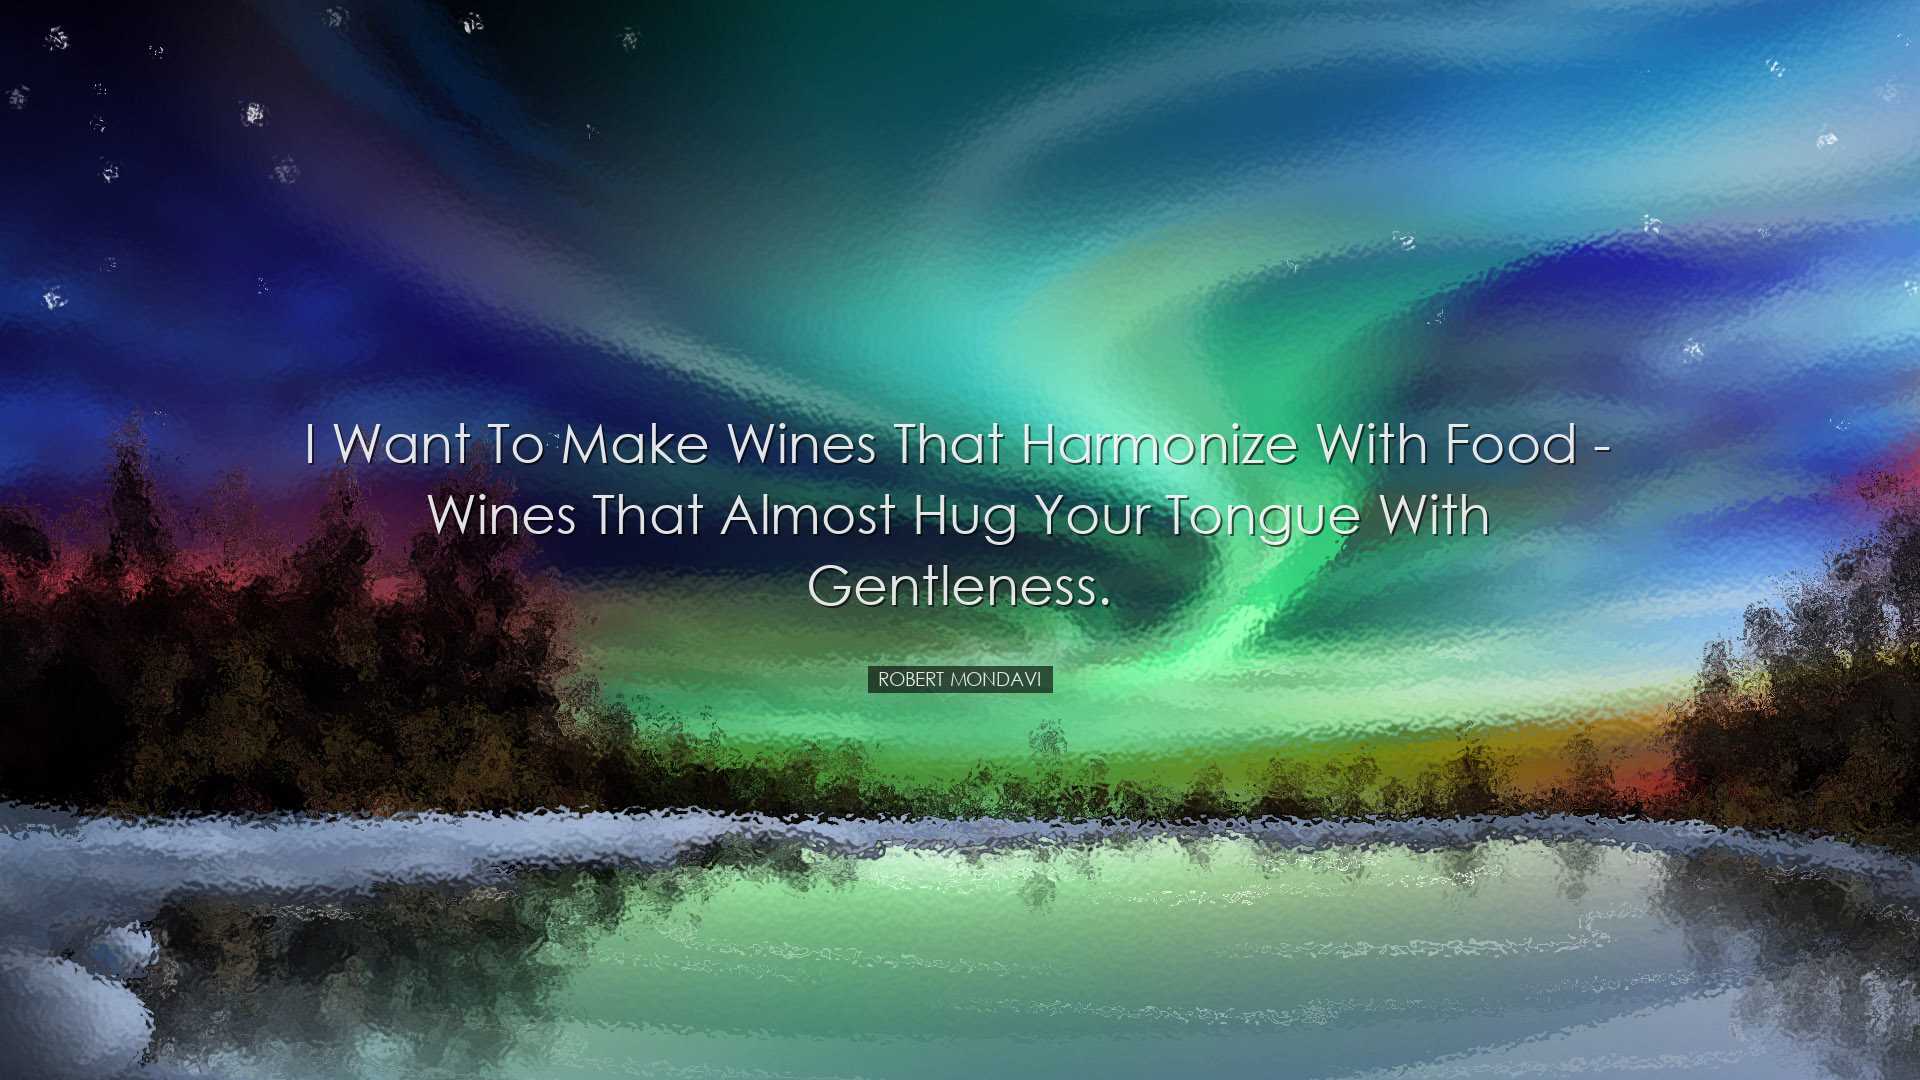 I want to make wines that harmonize with food - wines that almost